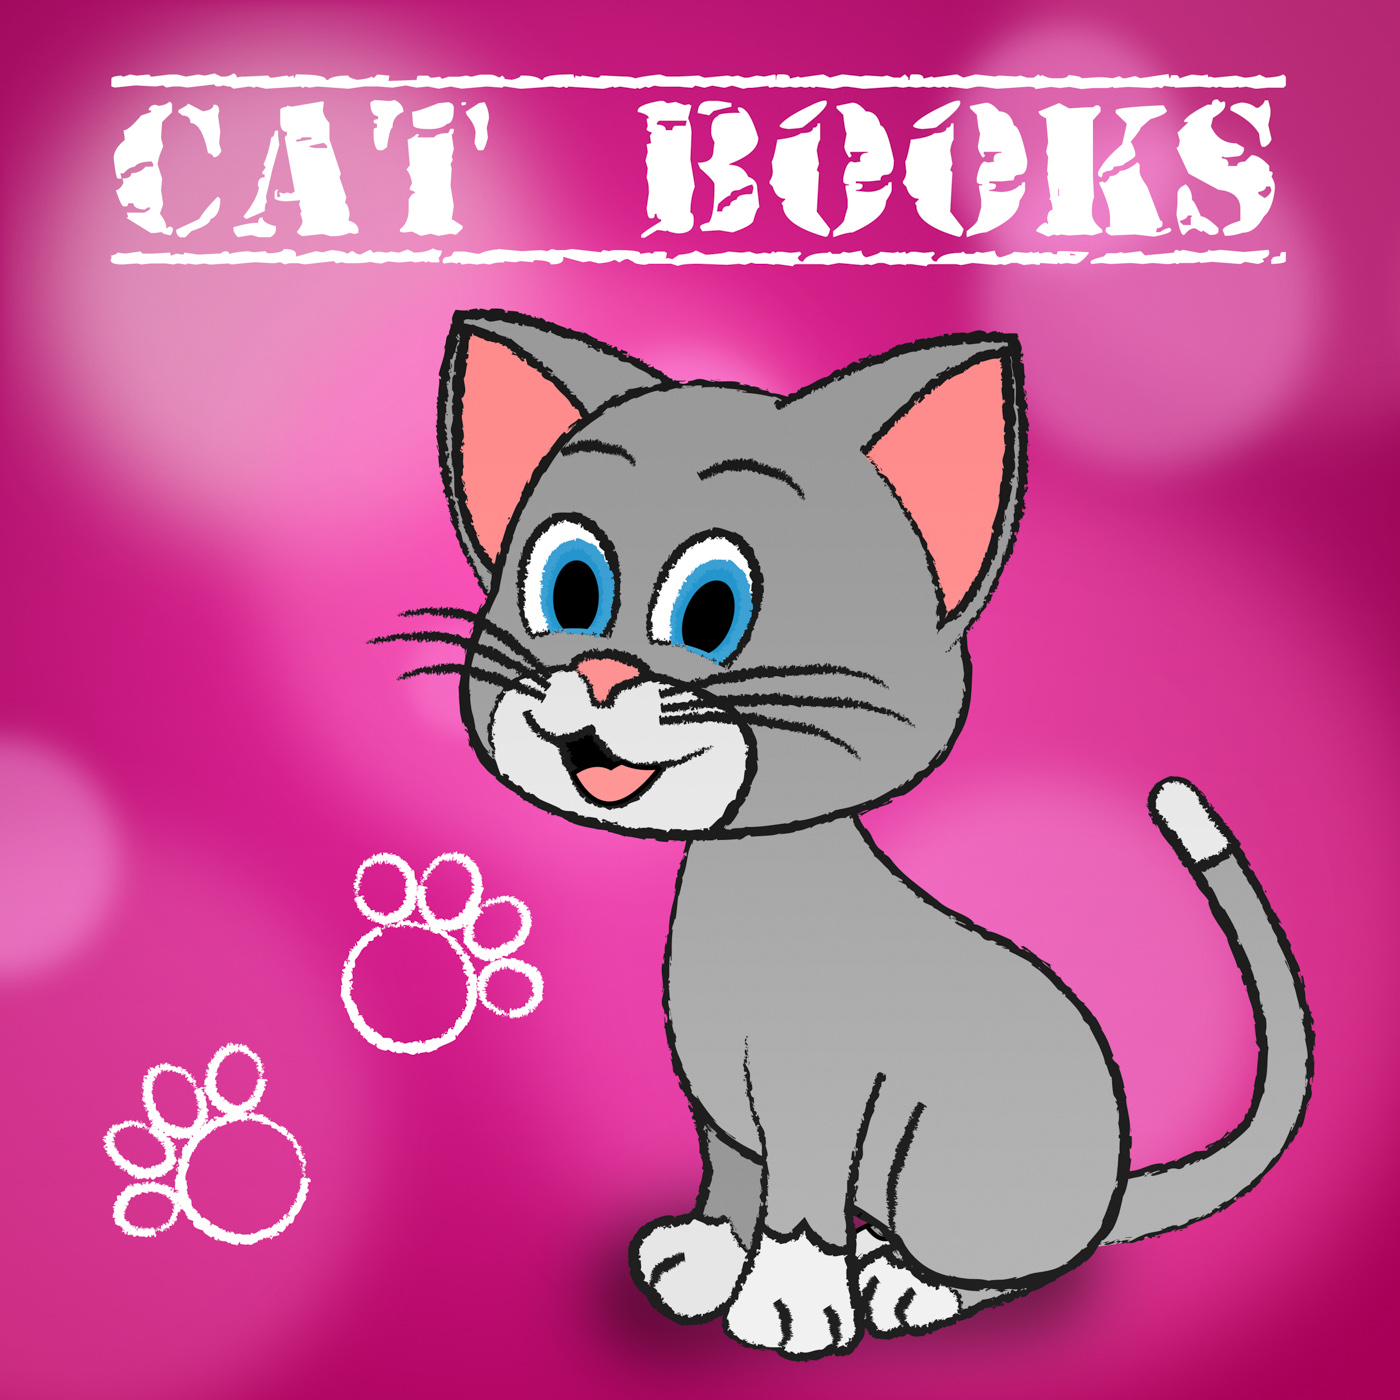 Cat books indicates learn education and felines photo